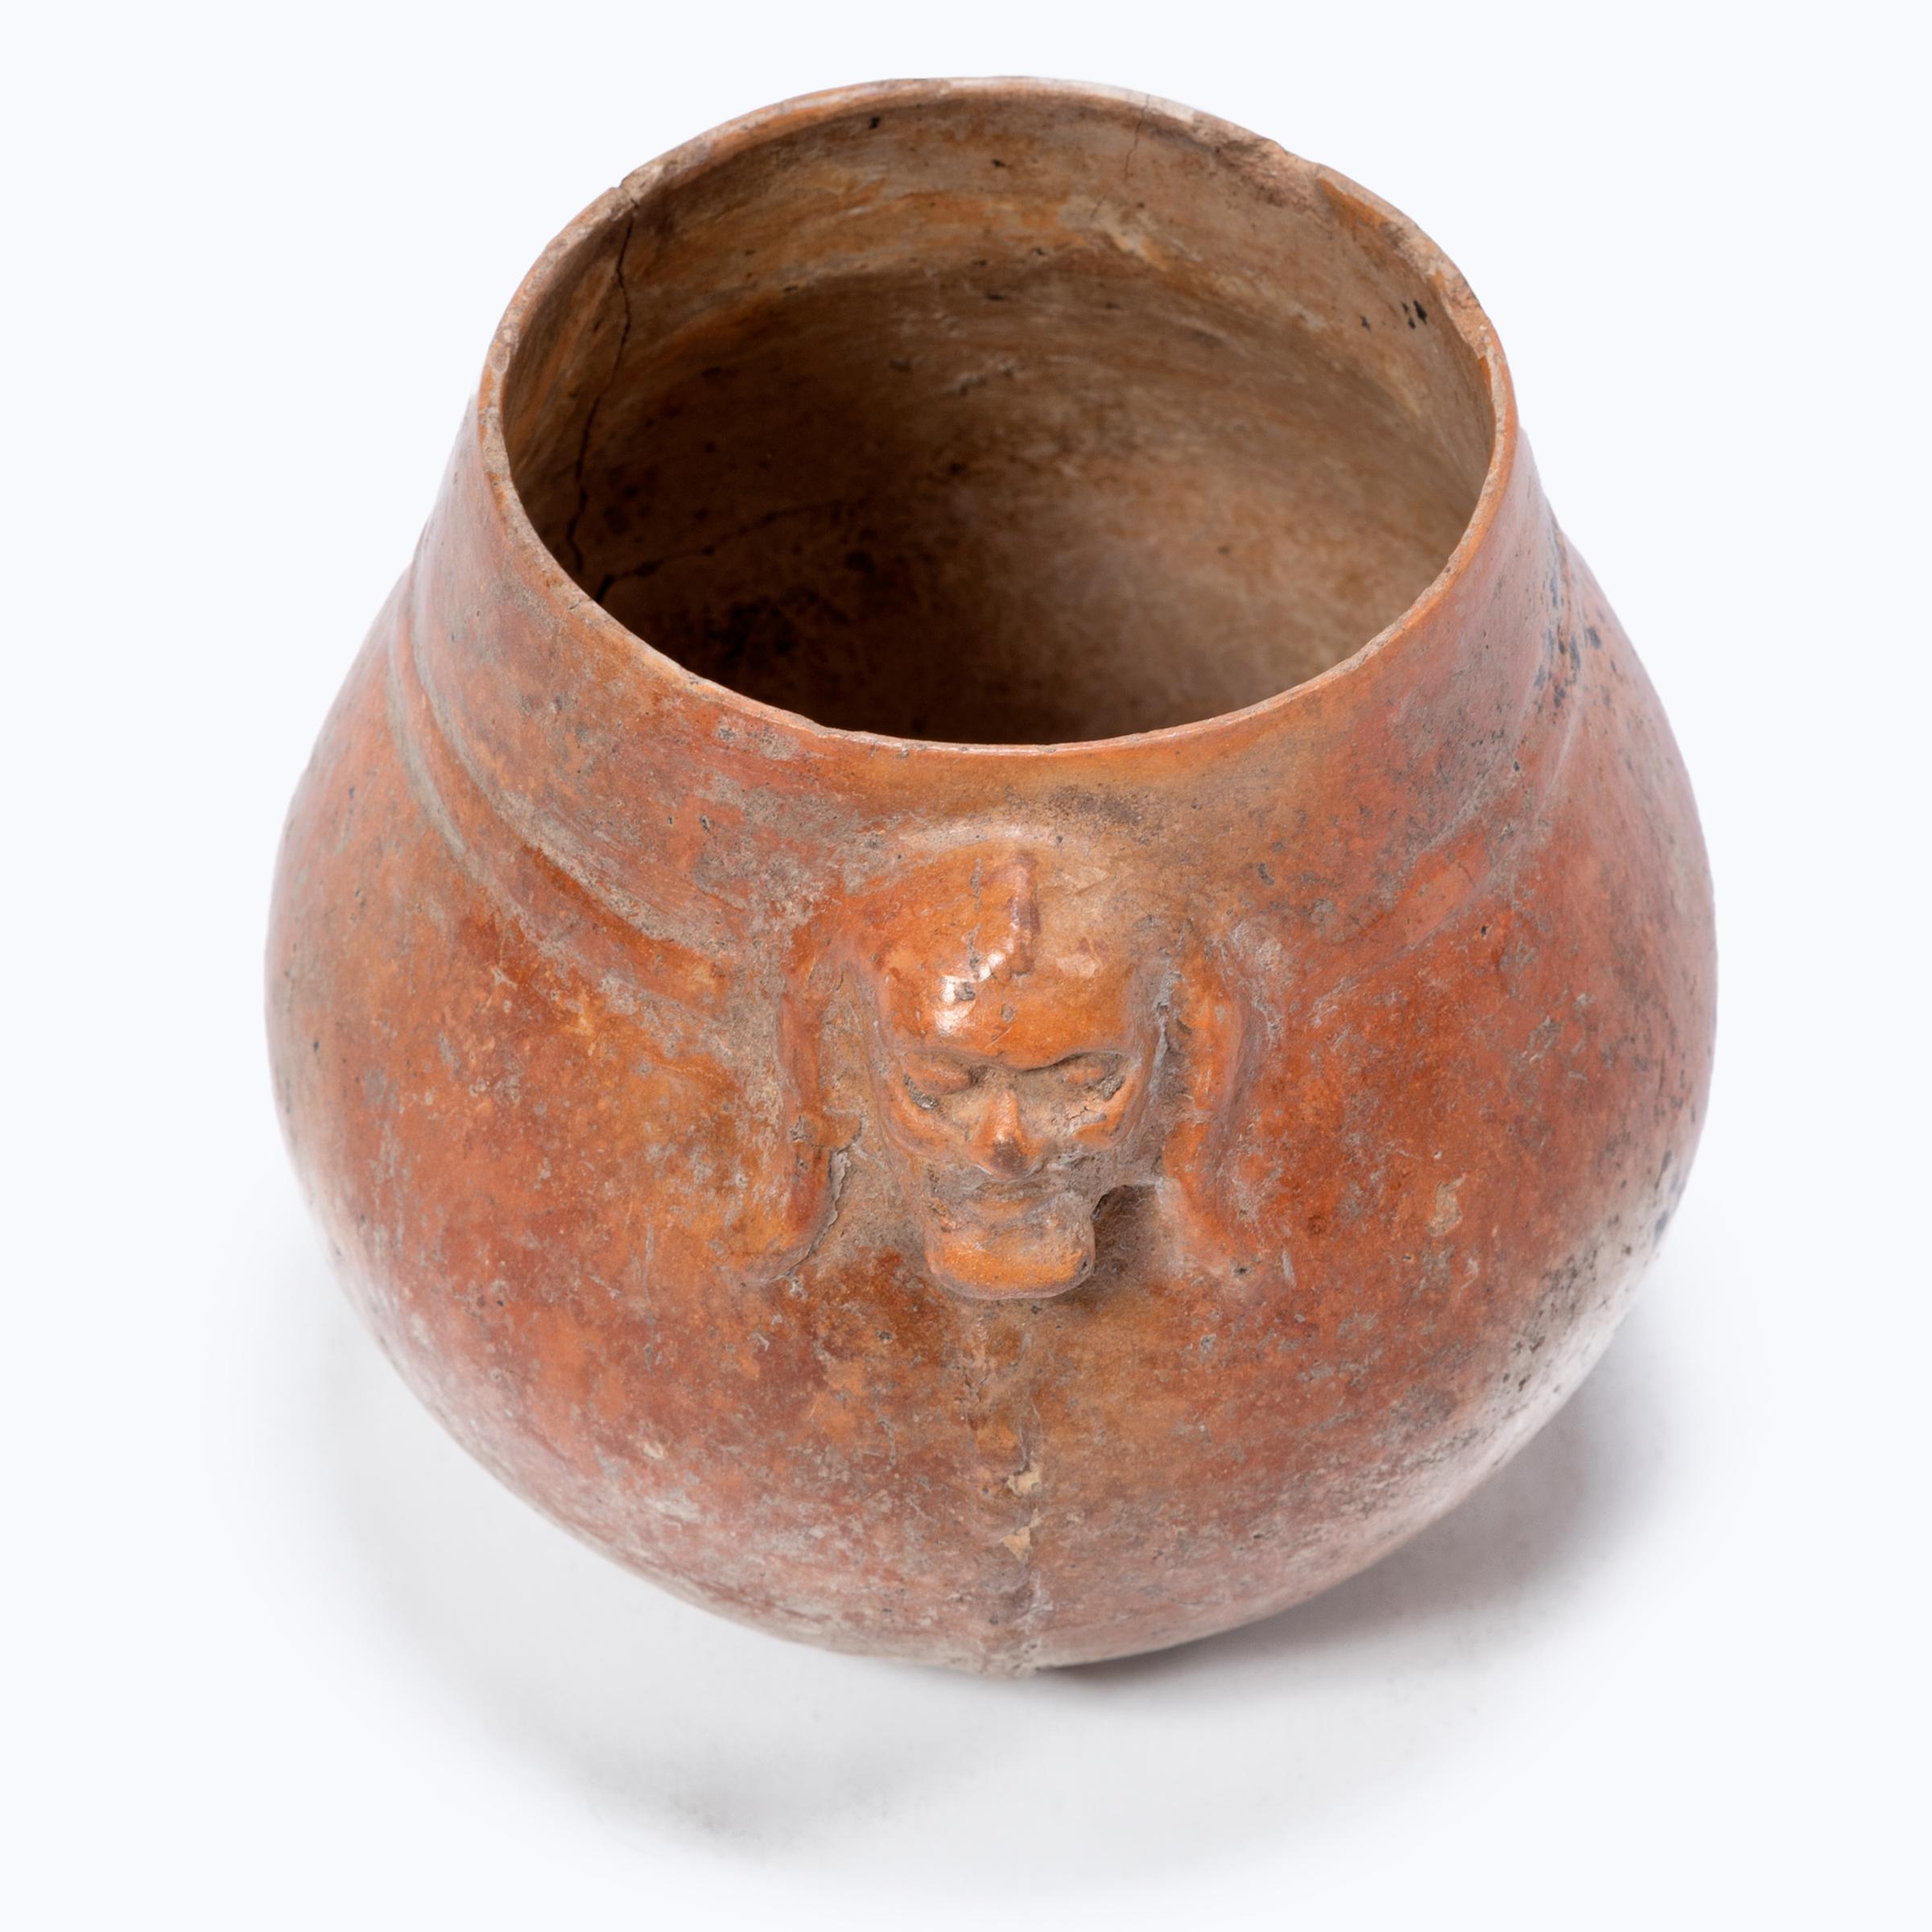 Exhibiting a rich patina, this petite redware vessel shows many telltale signs of Pre-Columbian pottery. Speckled with imperfections, the vessel's warm red-orange coloration was achieved by applying a mineral-rich slip for a monochrome finish.